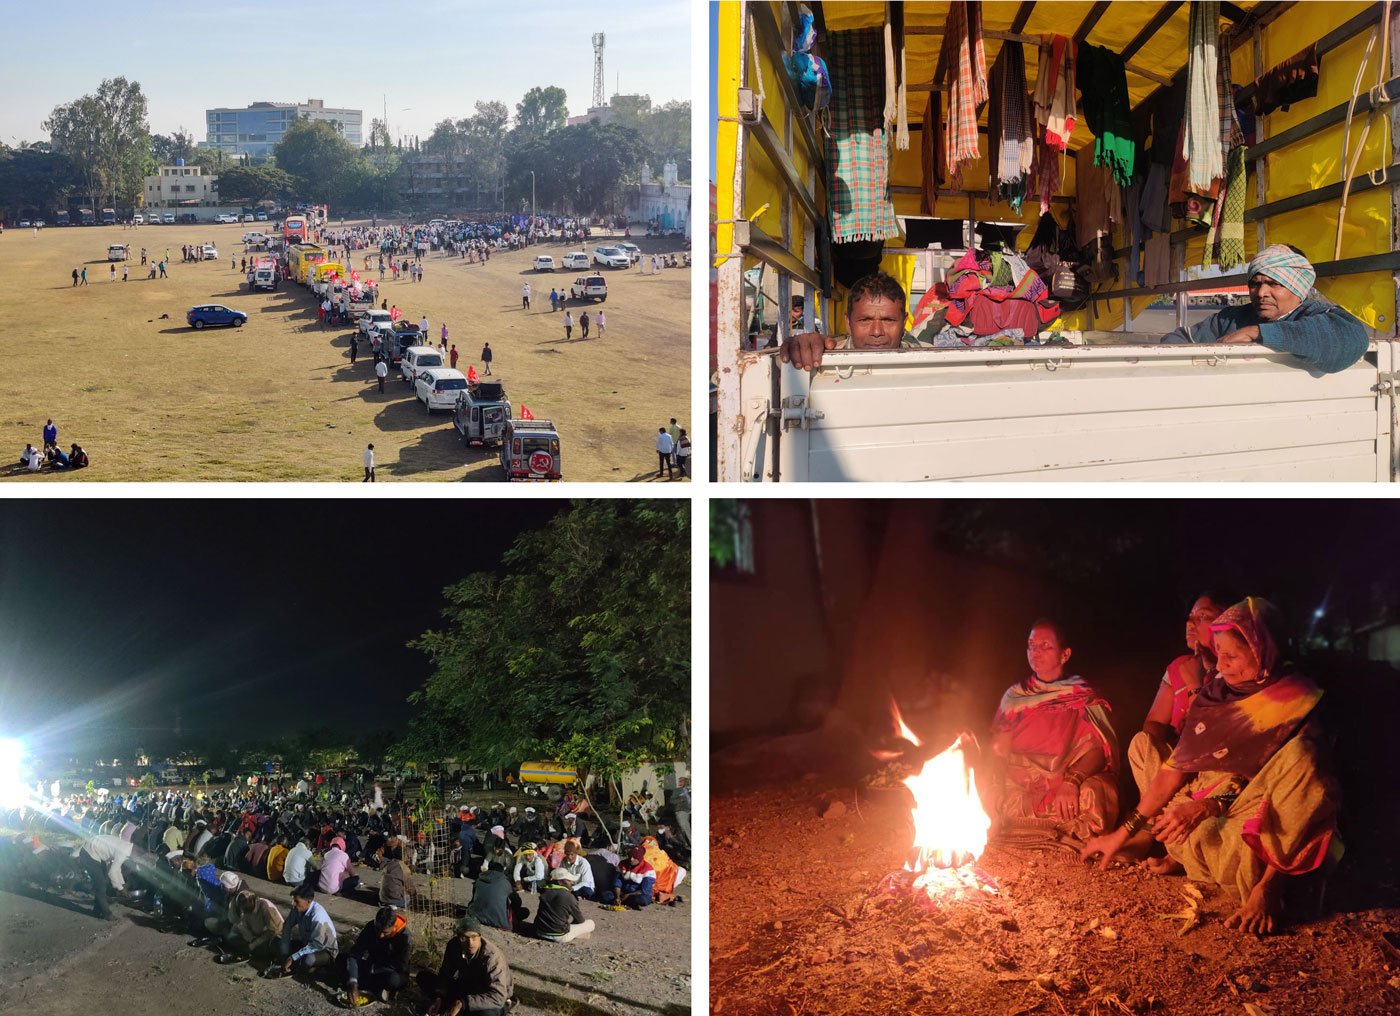 Top left: Left: The vehicles assembled at Golf Club Ground in Nashik. Top right: Farmers travelled in open-back tempos in the cold weather. Bottom: The group had dinner in Chandvad. They lit bonfires to keep themselves warm at night

